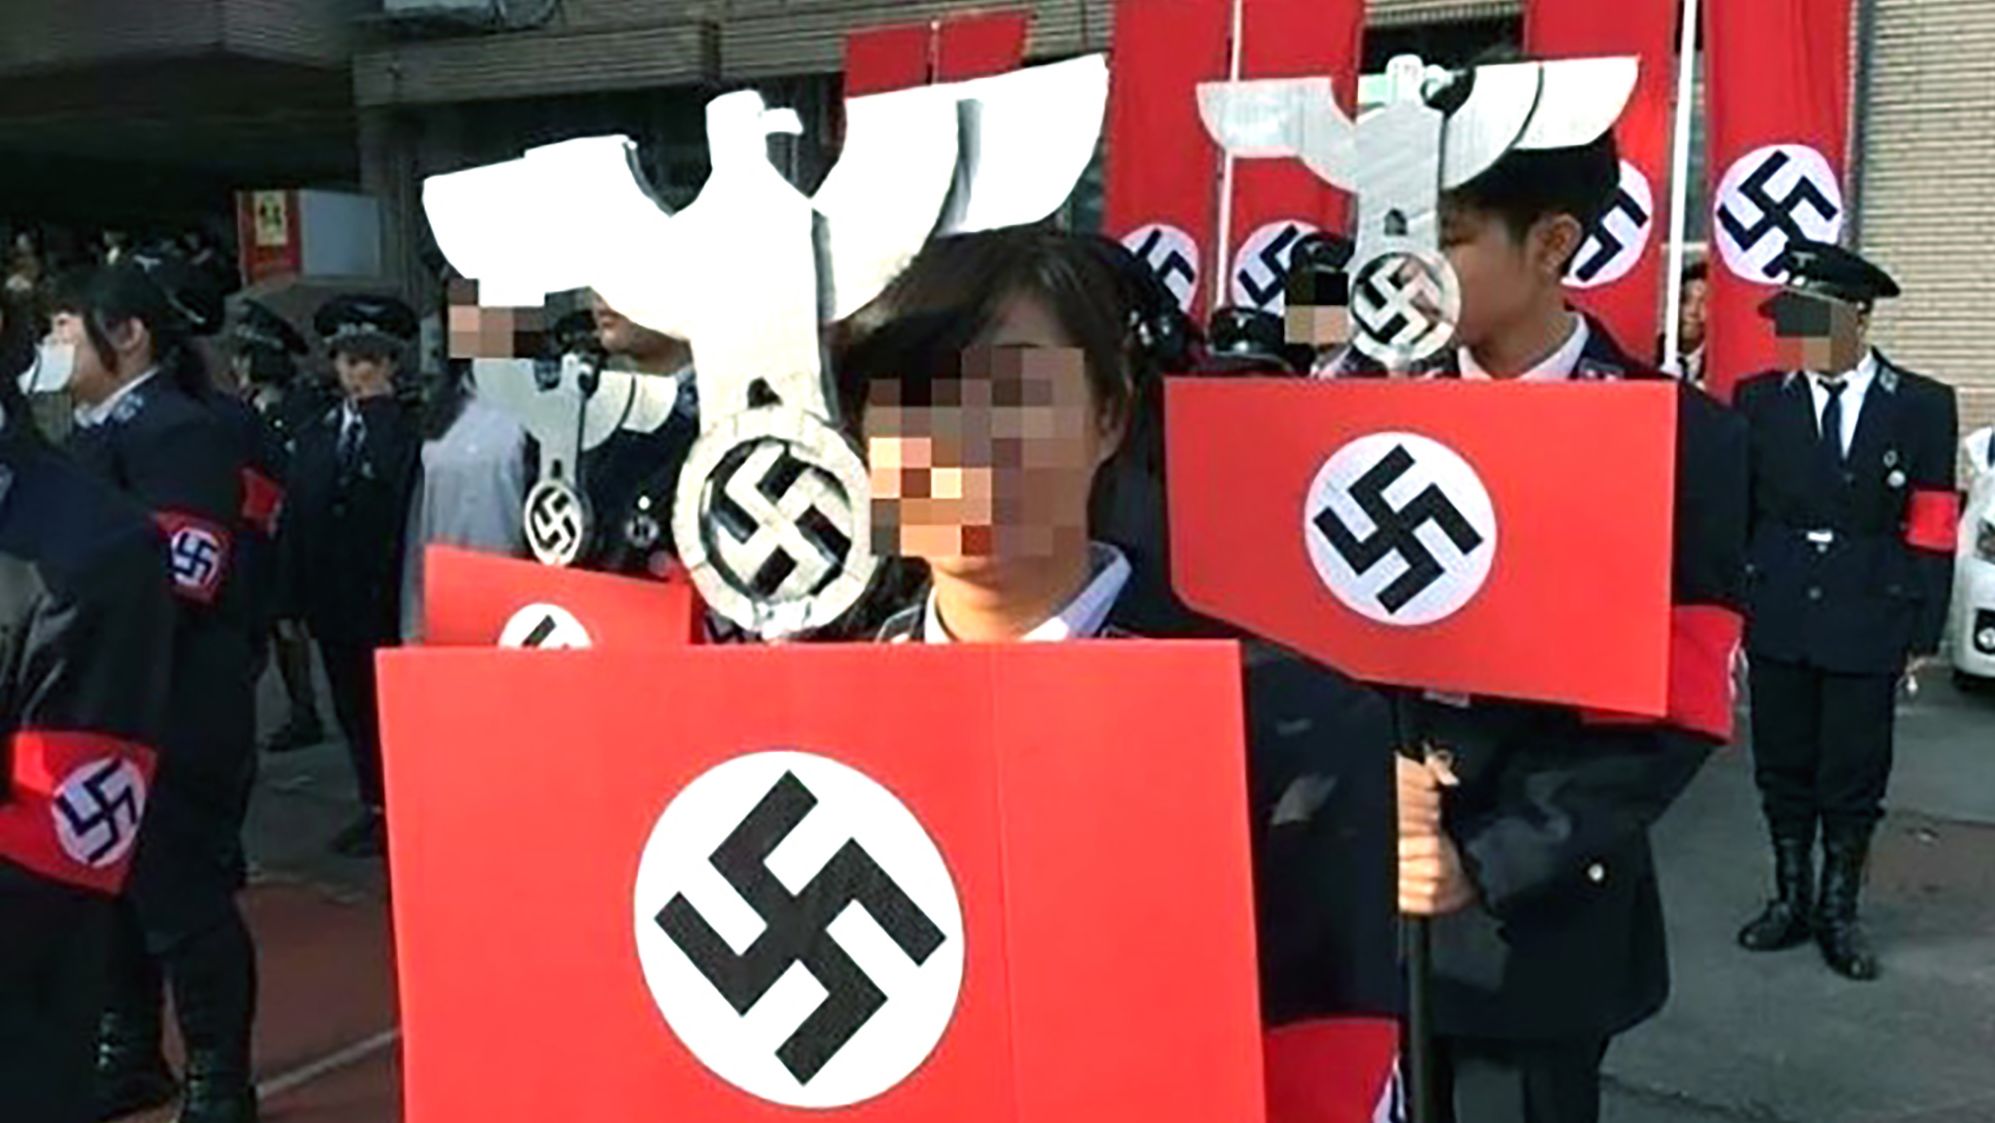 School students whose faces have been digitally obscured, wearing Nazi uniforms at the school in Hsinchu, western Taiwan, on December 23.